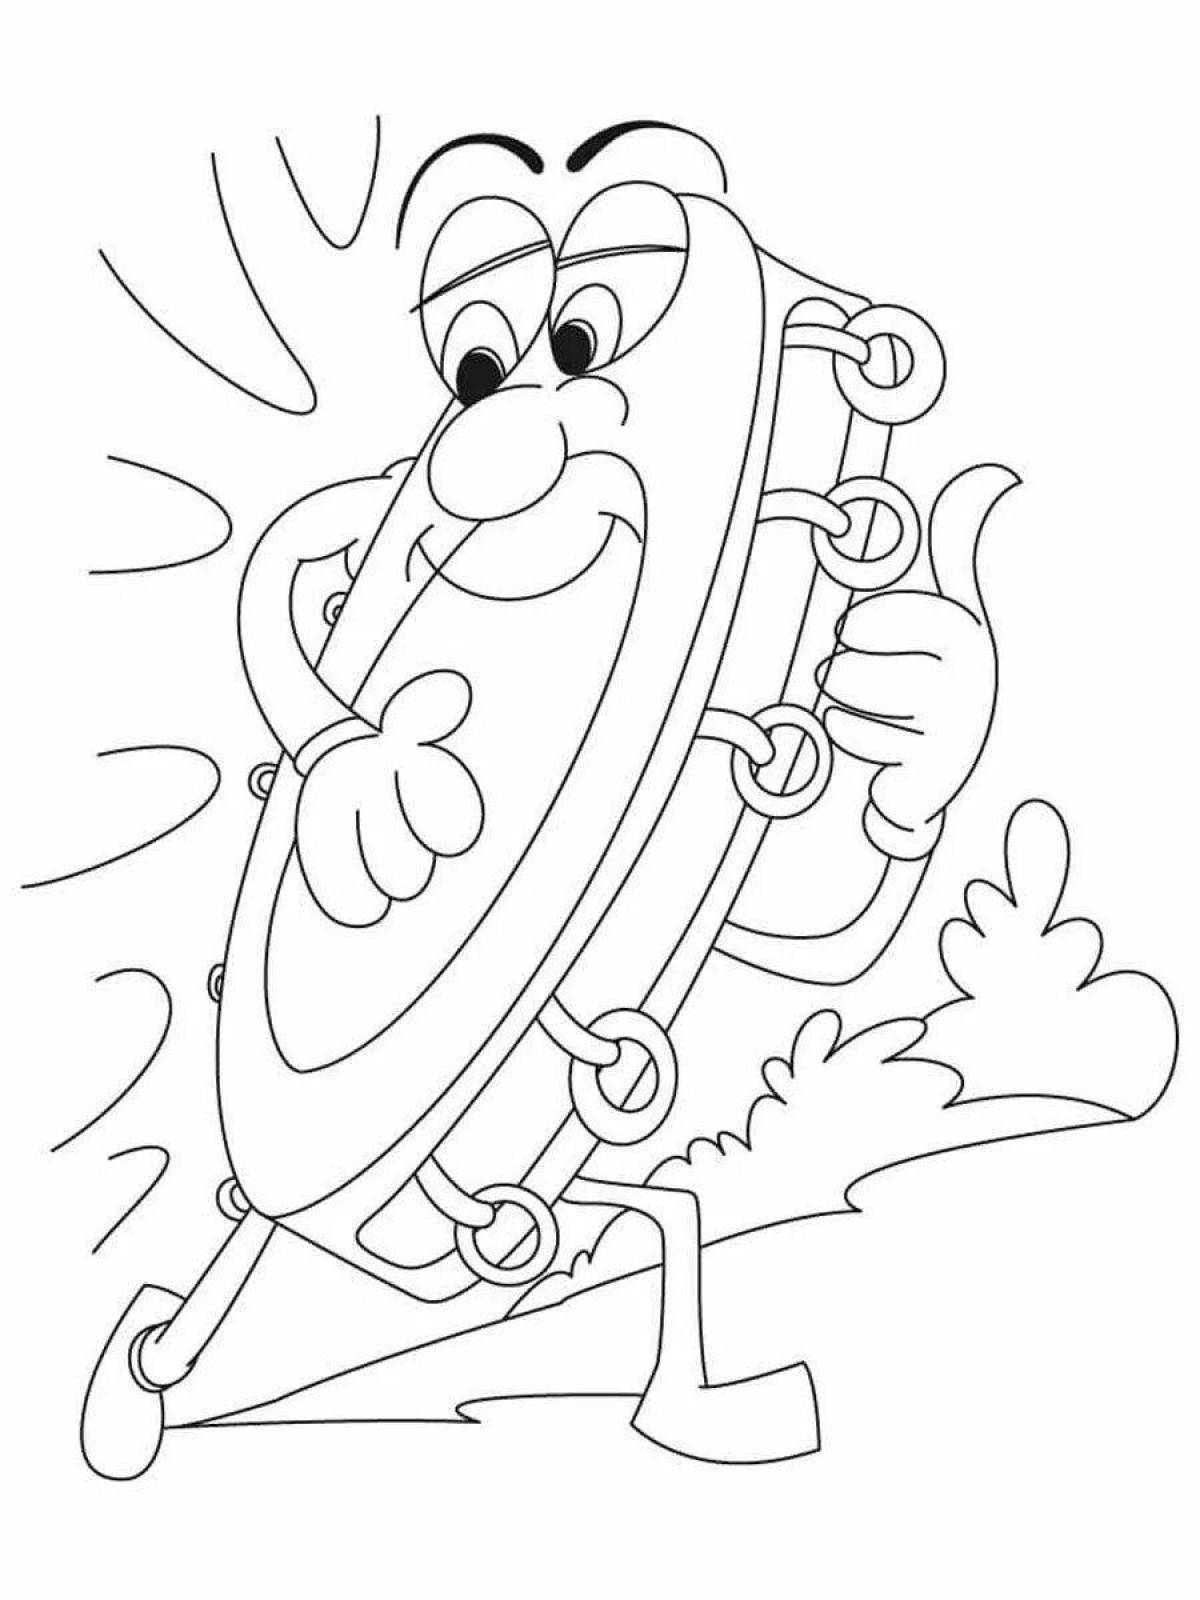 Glorious tambourine coloring page